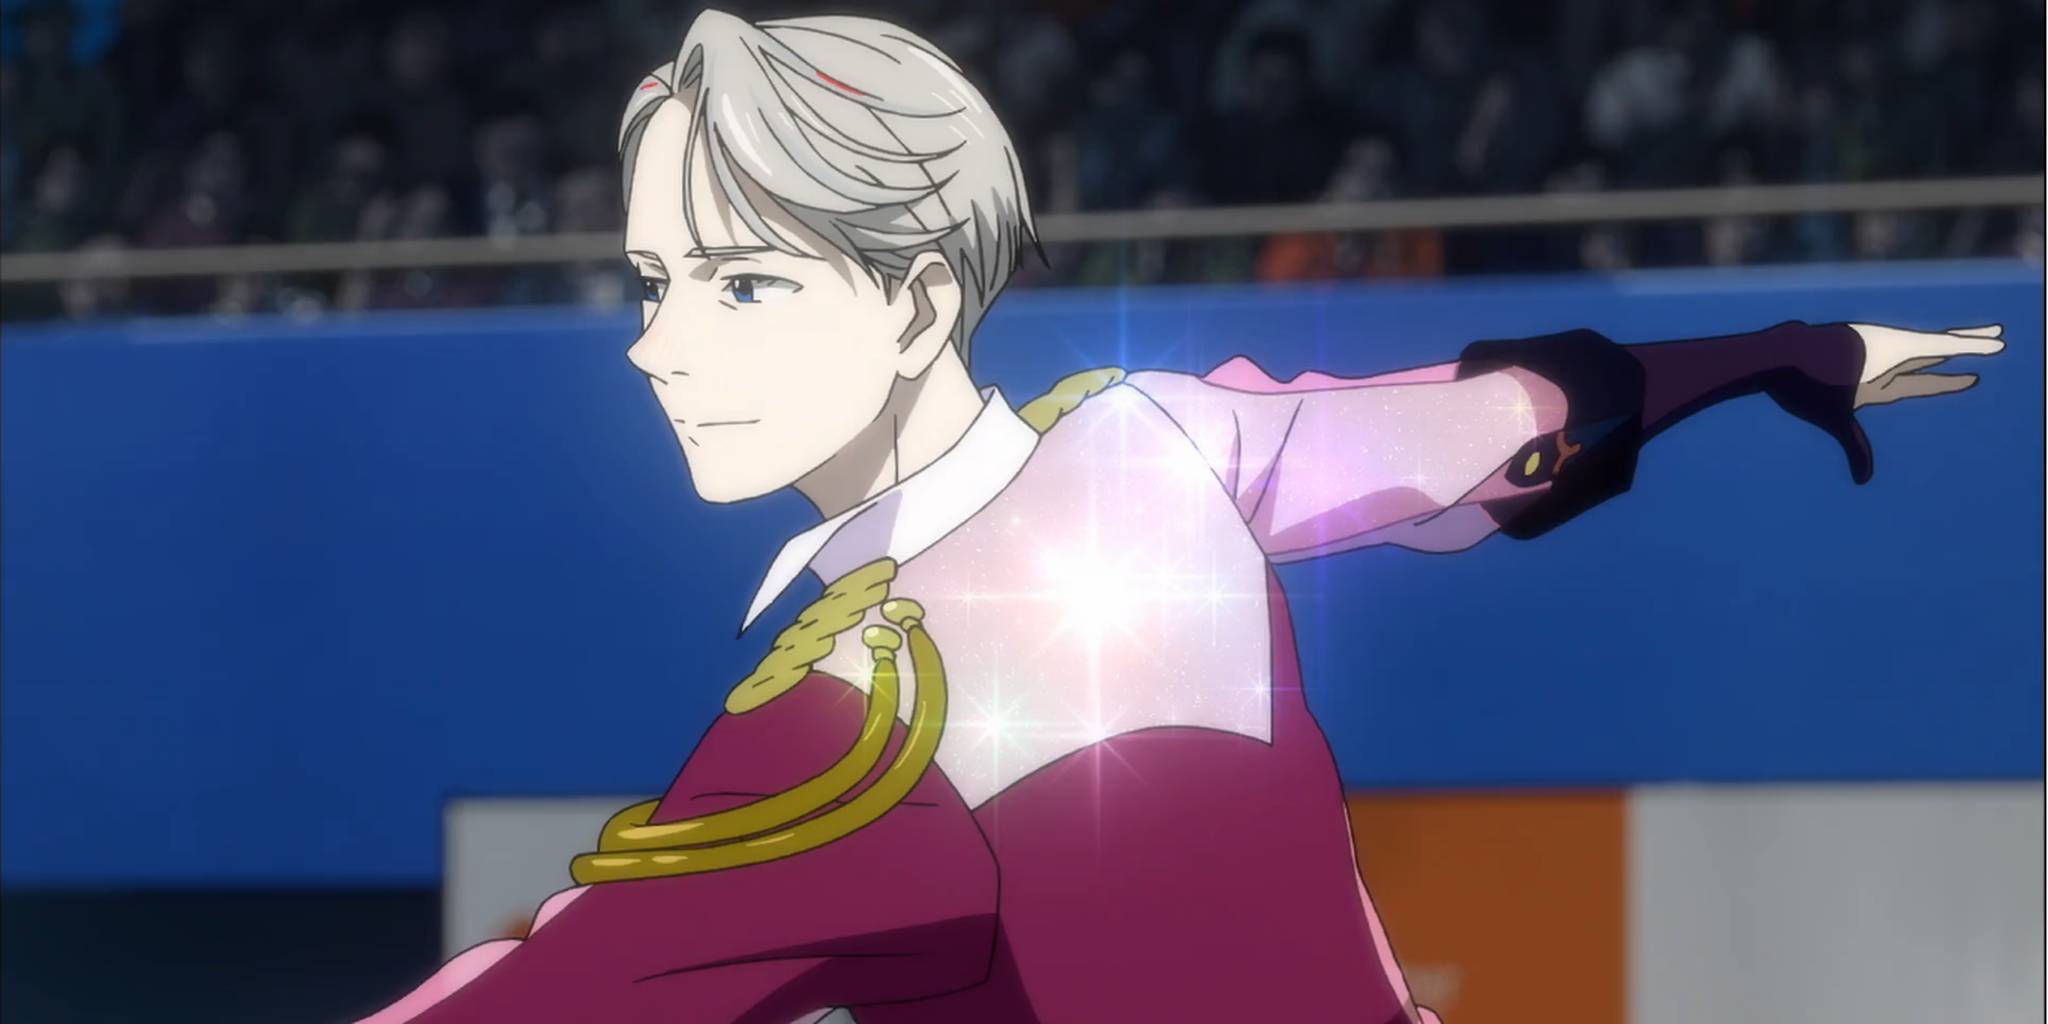 Japanese Skaters Performed to Yuri on Ice at the Olympics - IGN